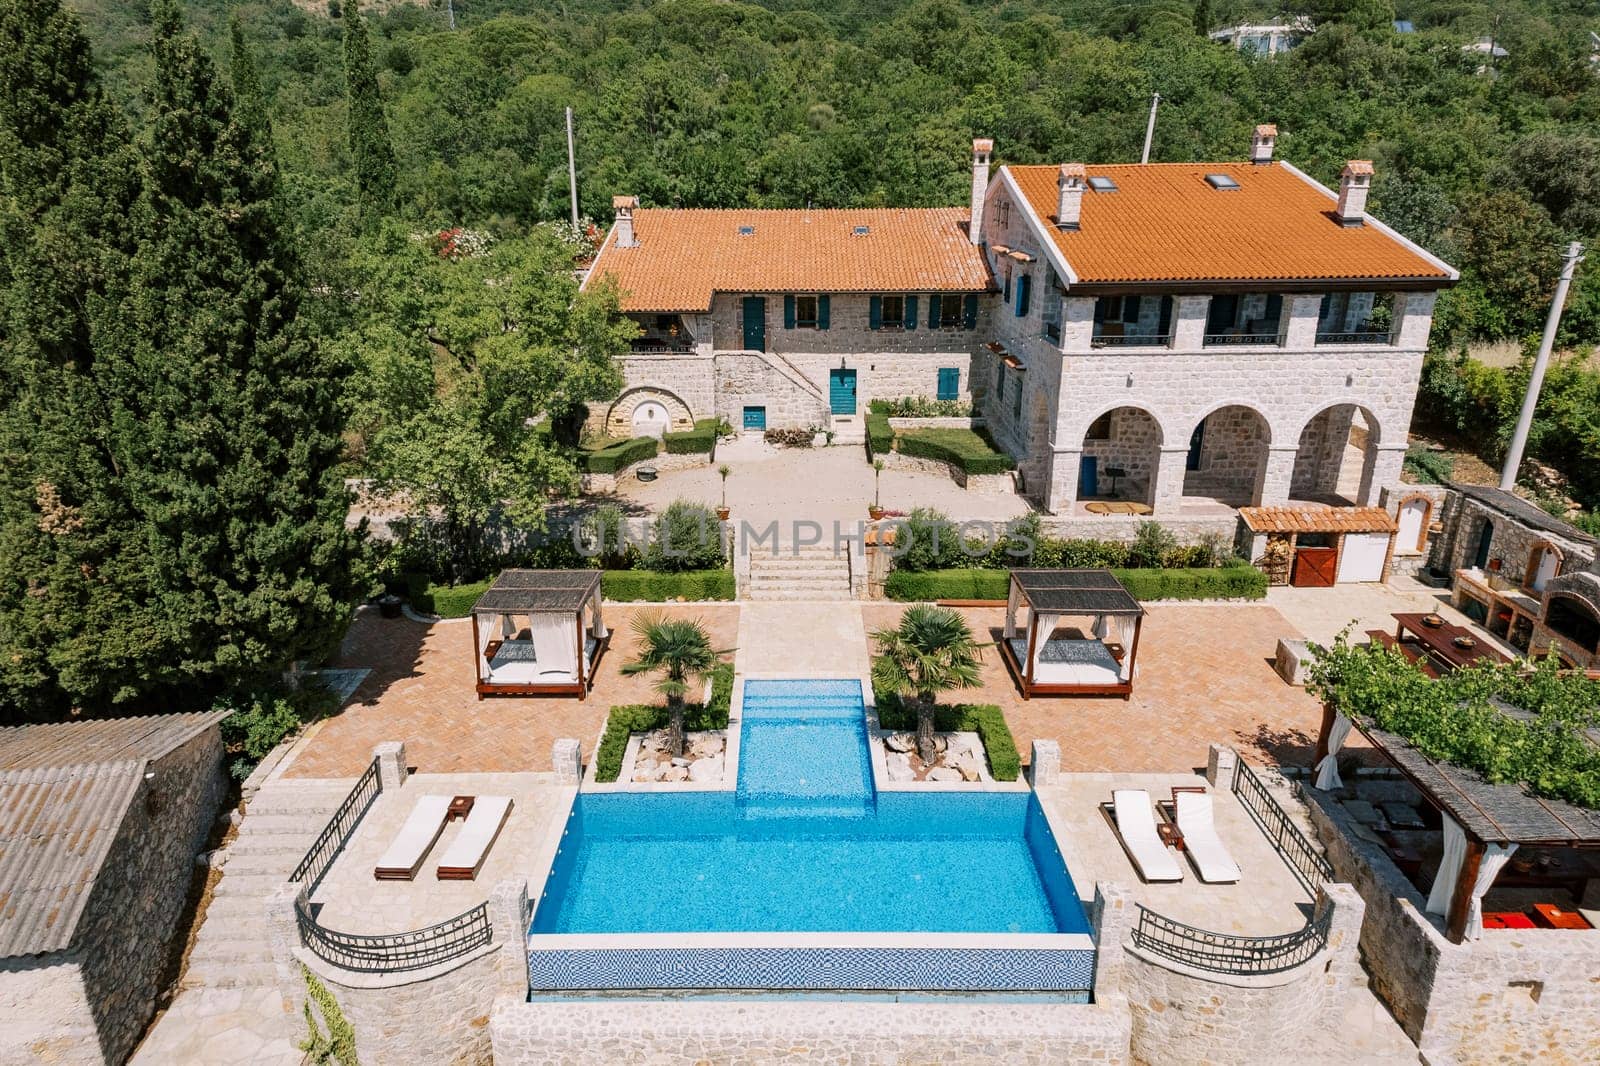 Sun loungers stand near the T-shaped pool in the courtyard of an ancient stone villa in a green garden. Drone. High quality photo